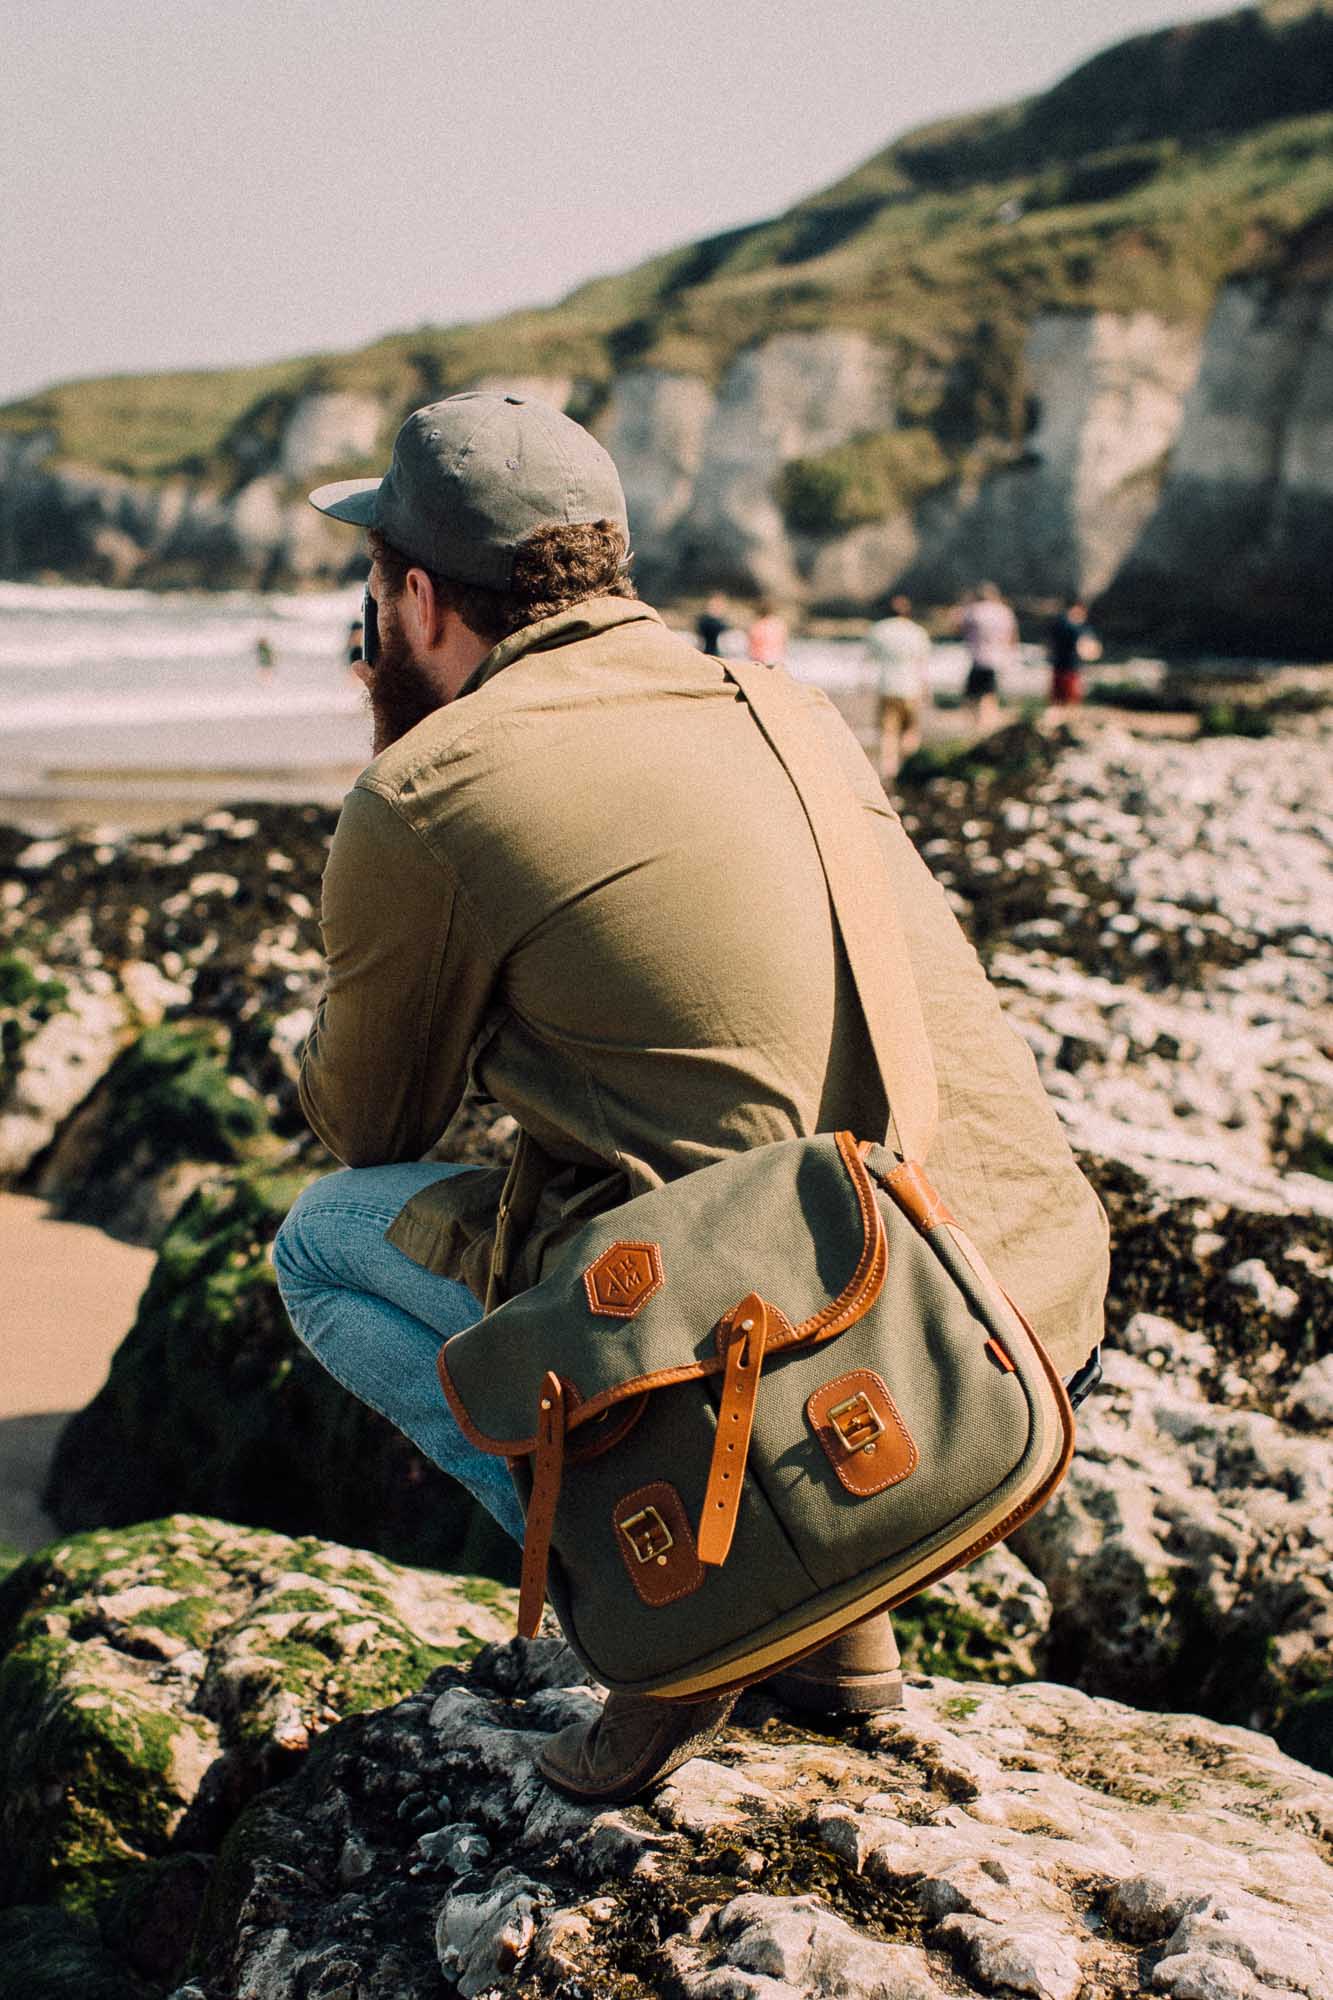 Billingham Hadley Small Review: The Best Small Camera Bag - Compact Shooter